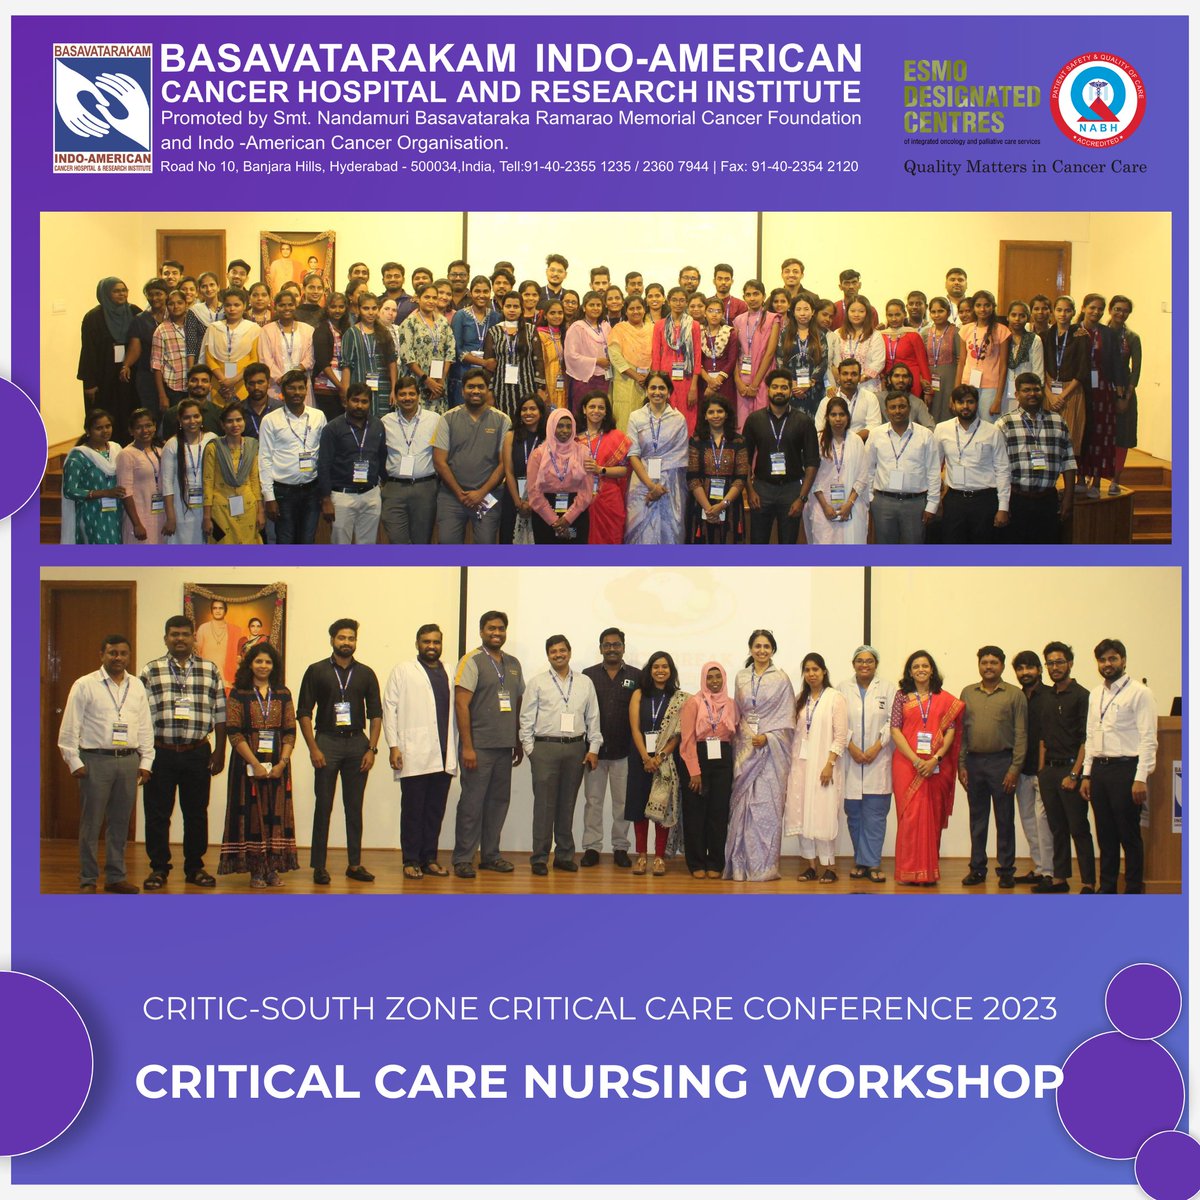 Yesterday, on the 17th of November 2023, Basavatarakam Indo American Cancer Hospital and Research Institute, in collaboration with the Indian Society Of Critical Care Medicine (ISCCM), orchestrated a transformative one-day workshop on Critical Care Nursing. (1/6)